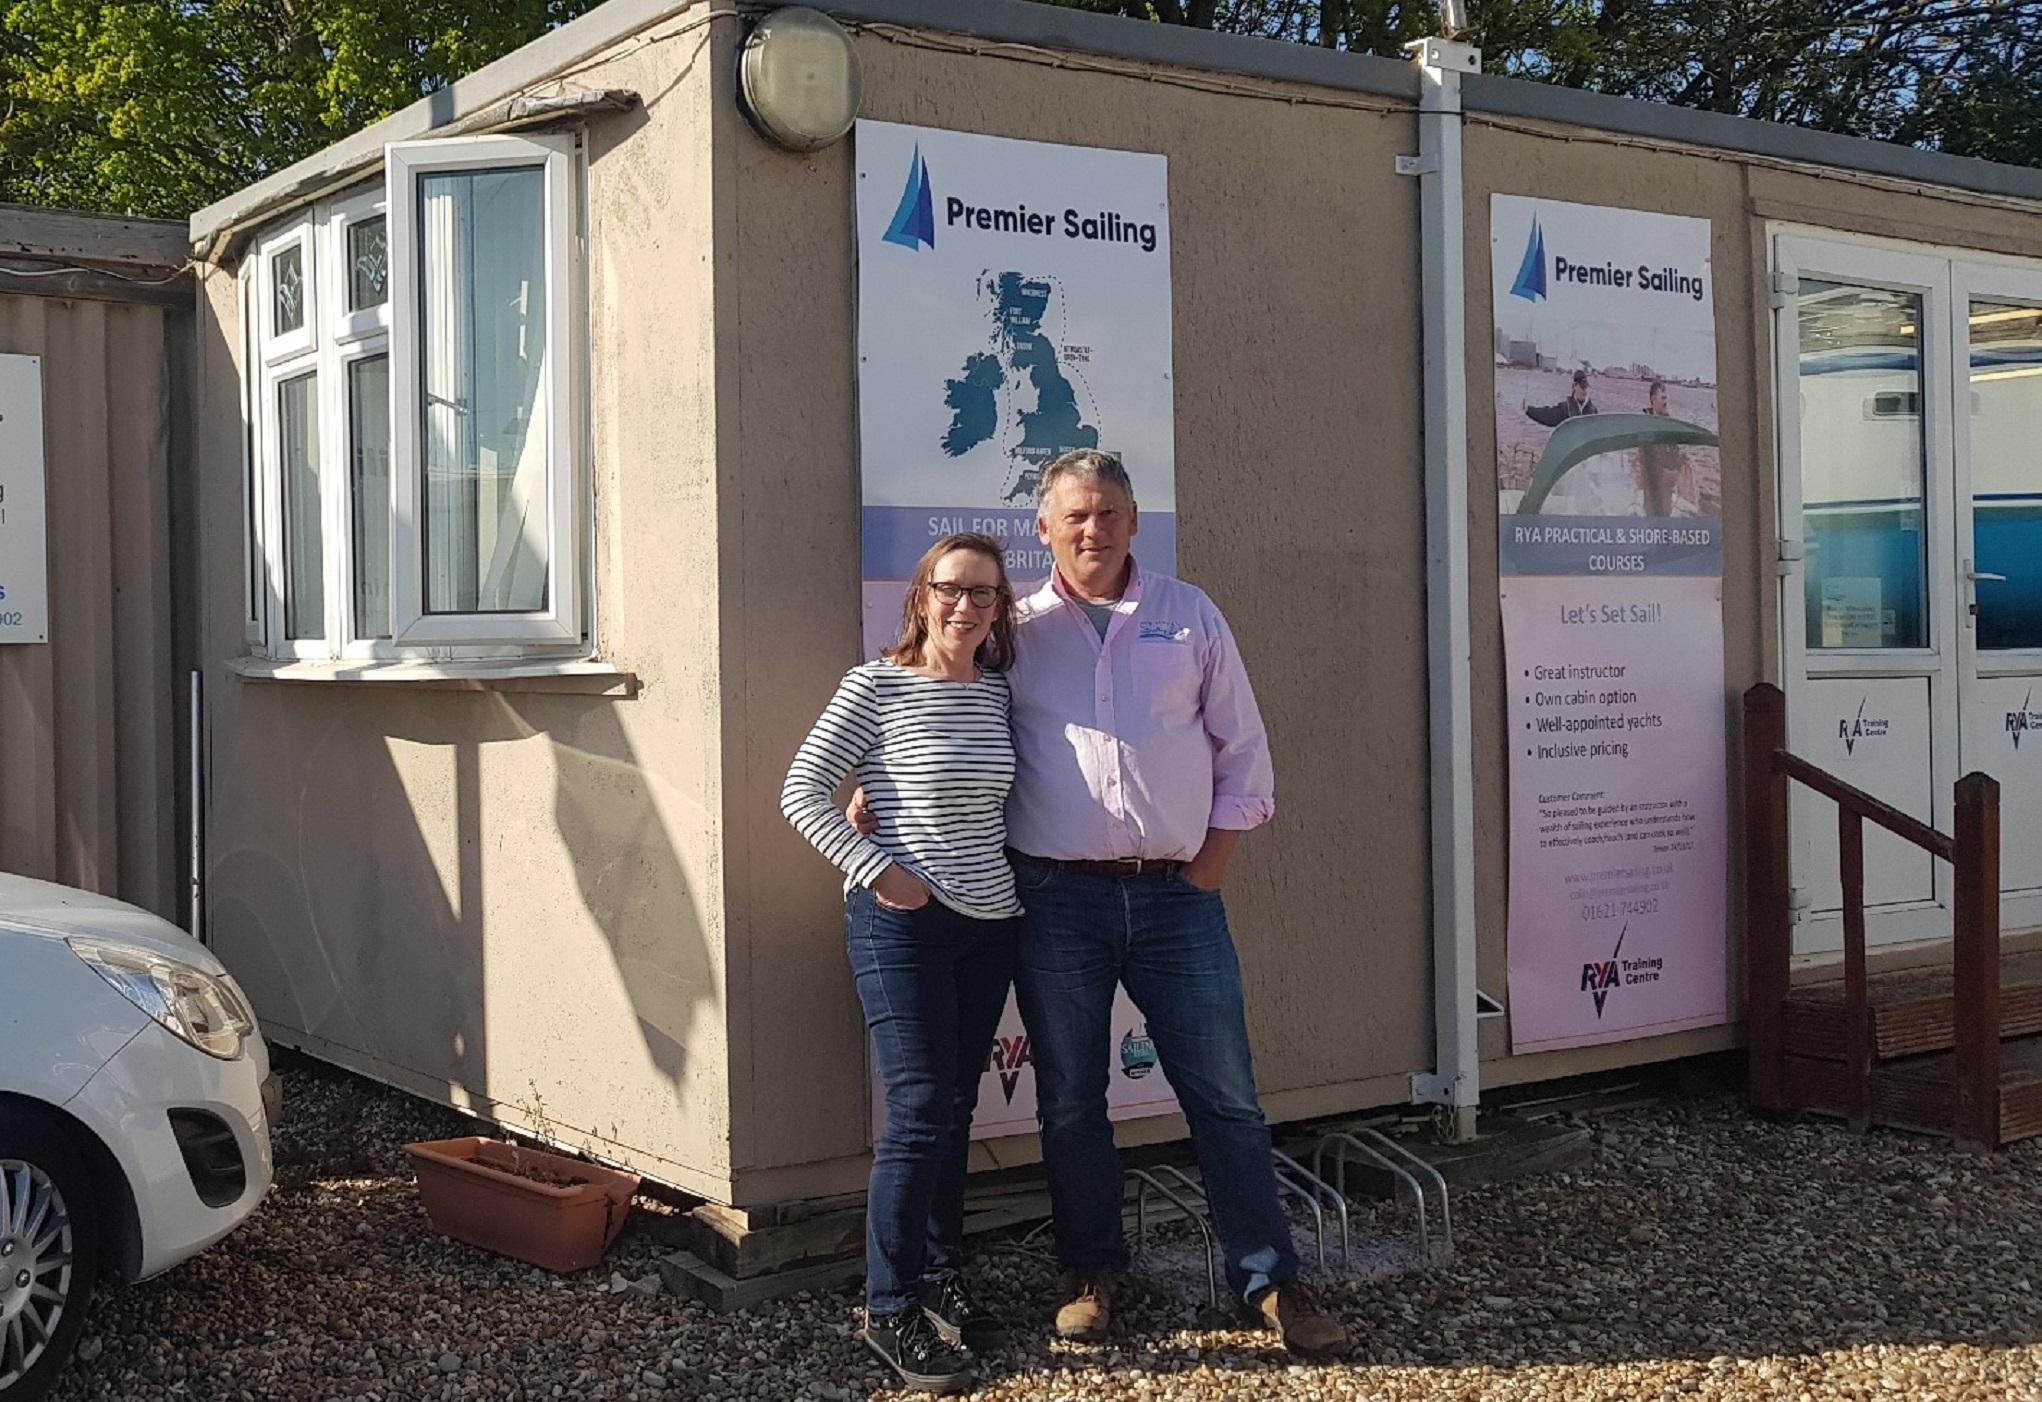 Colin Stracey and his wife Jan run Premier Sailing in Fambridge, Essex and found they were unable to claim the state grant for small firms (Colin Stracey)